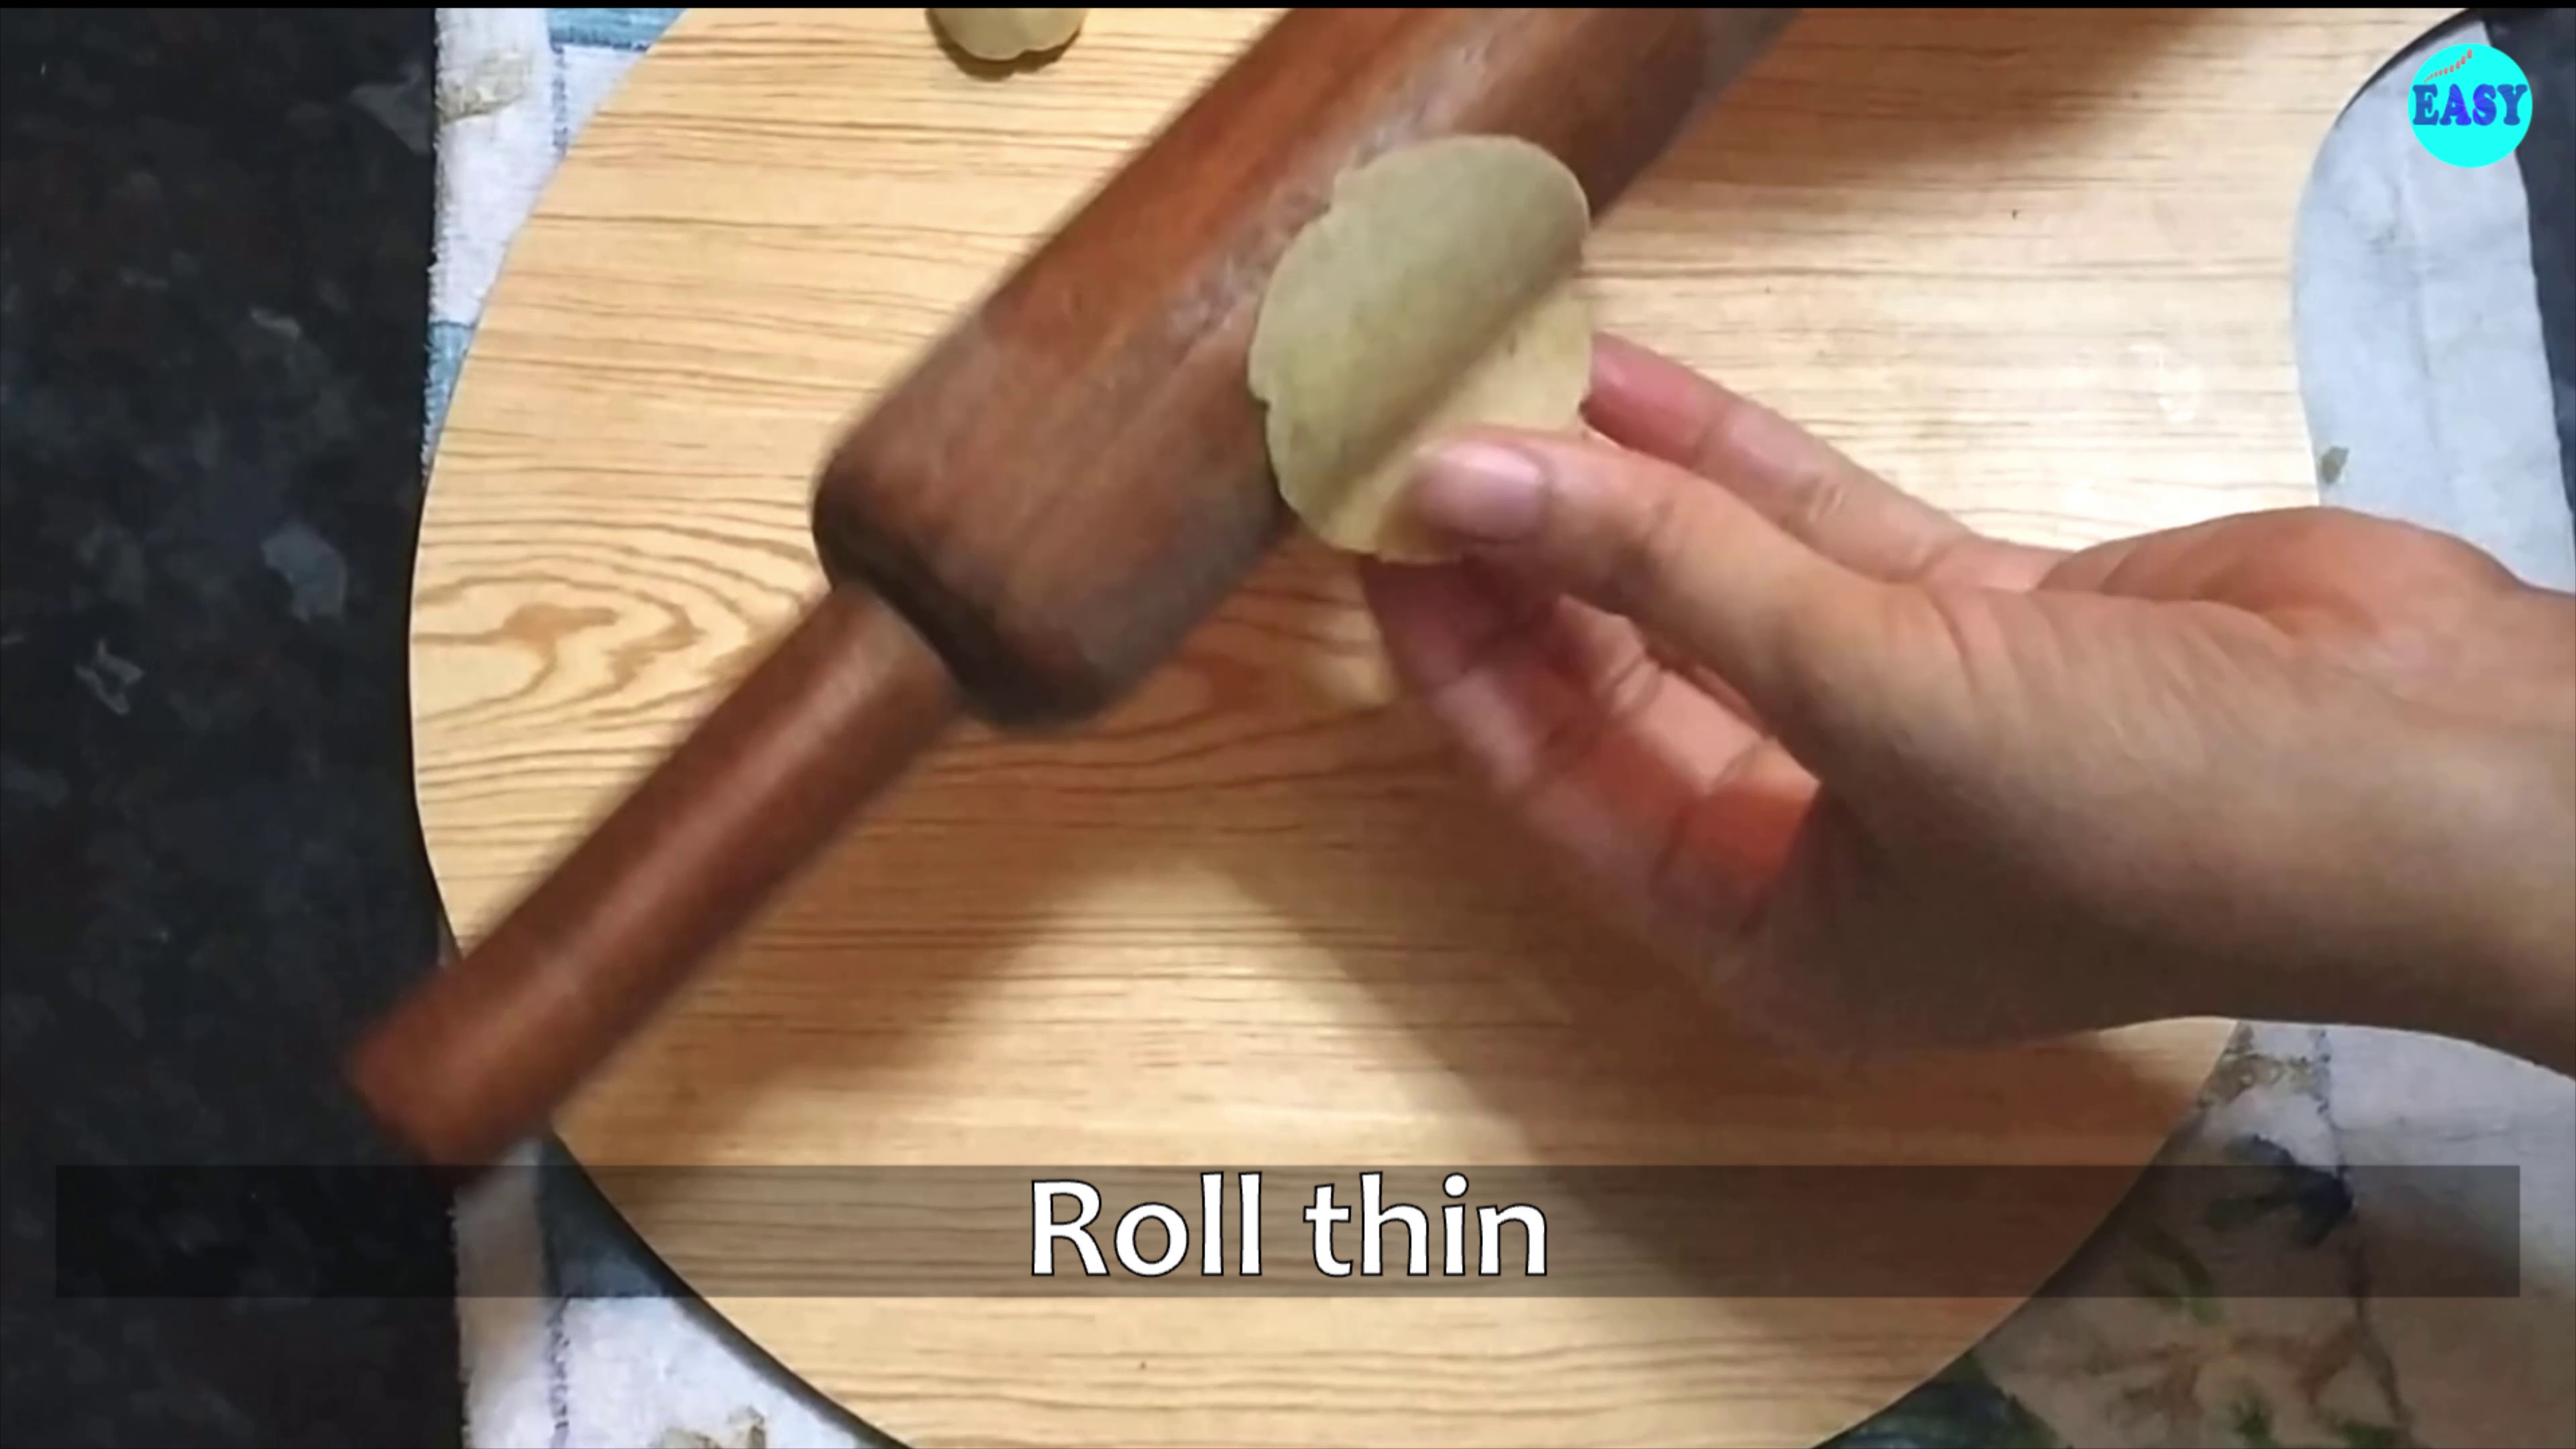 Step 8 - Now make the small balls out of the dough and roll it thin with the help of a rolling pin. Alternatively, you can roll a big sheet and cut it with the help of any cutter or glass.